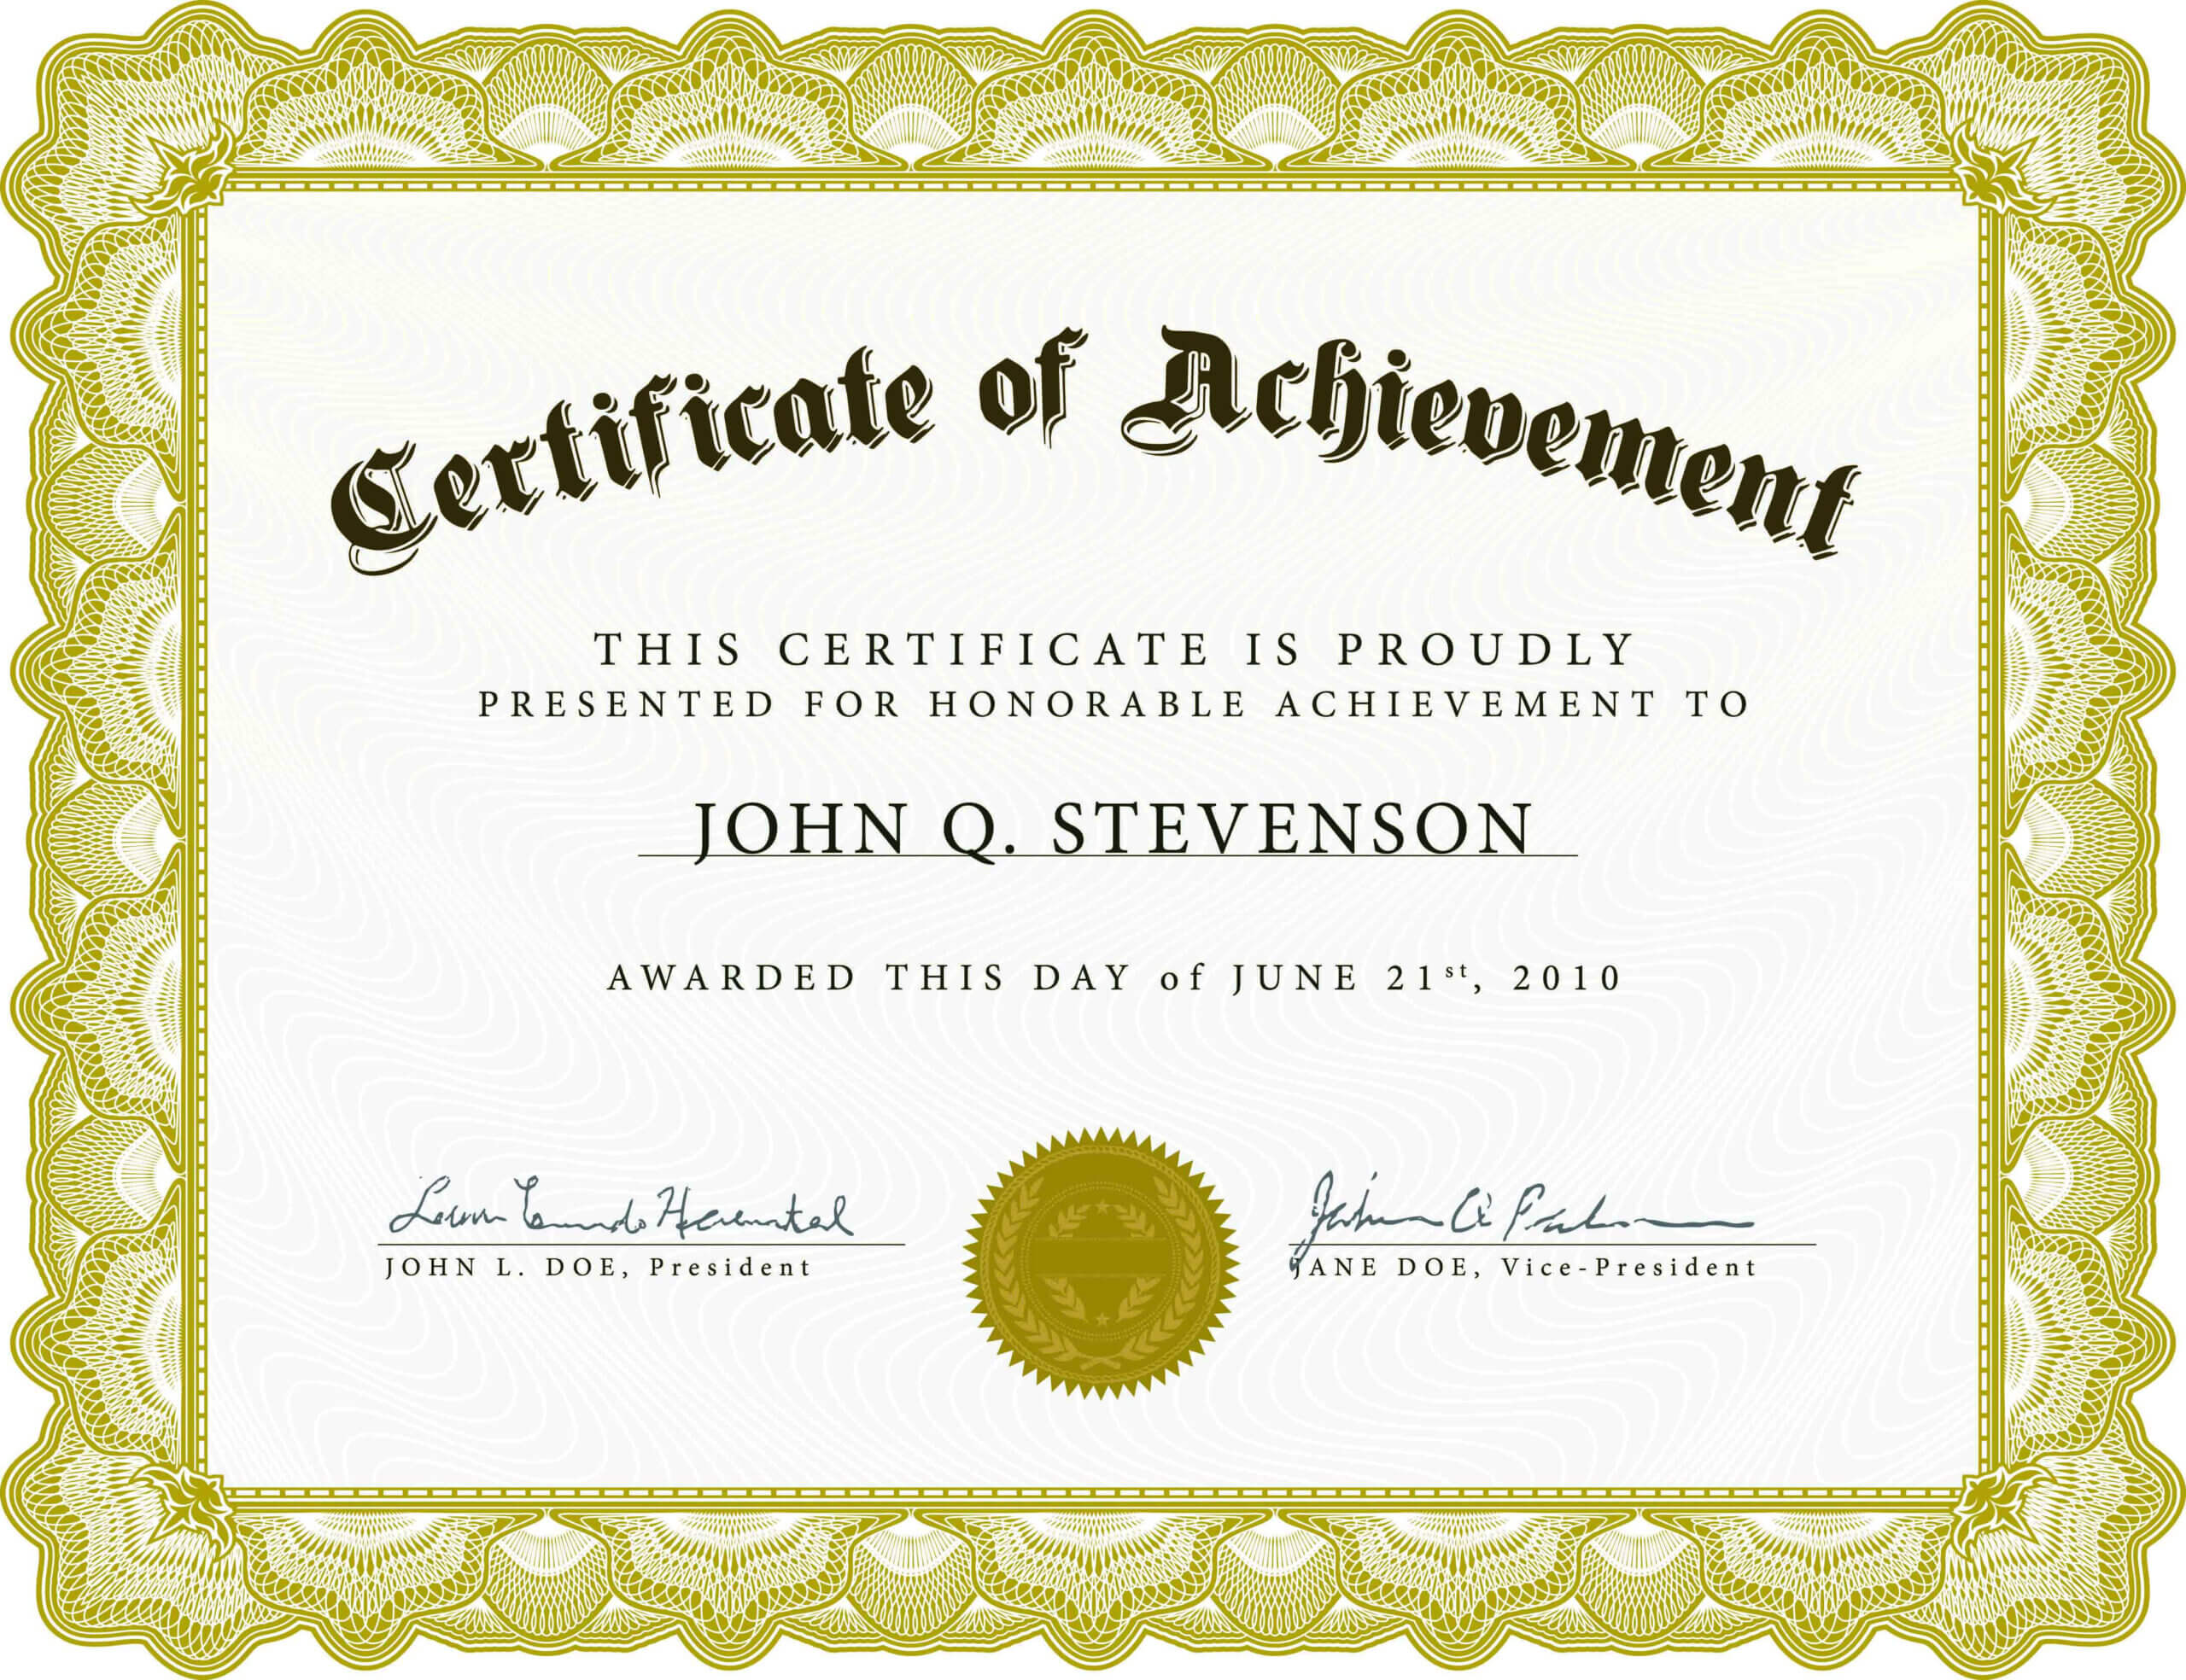 Certificate Of Academic Achievement Template | Photo Stock Within Blank Certificate Templates Free Download